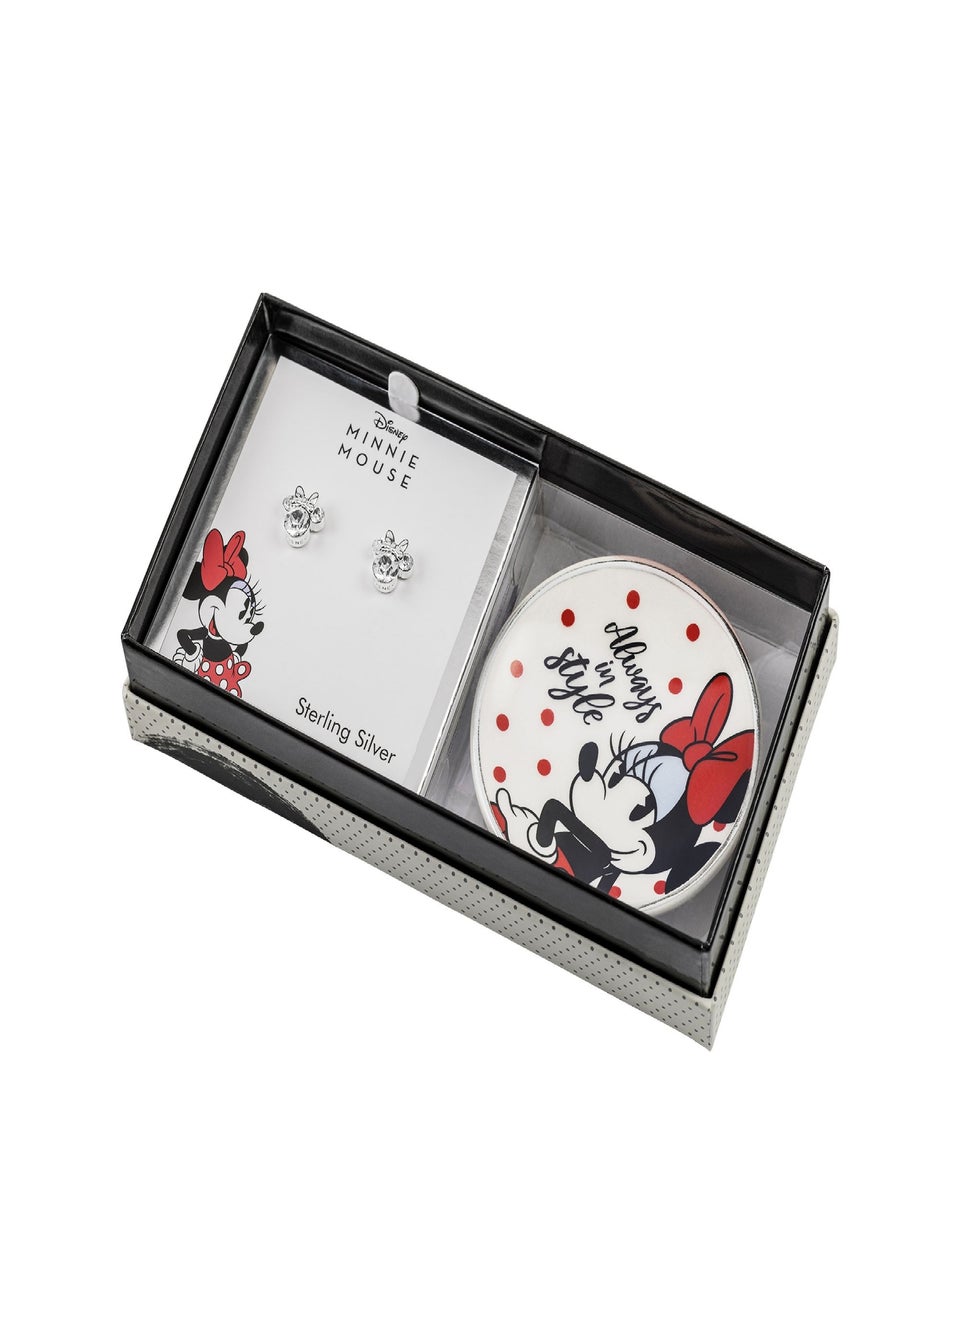 Disney Silver Plated Earrings and Mini Trinket Tray Gift Set